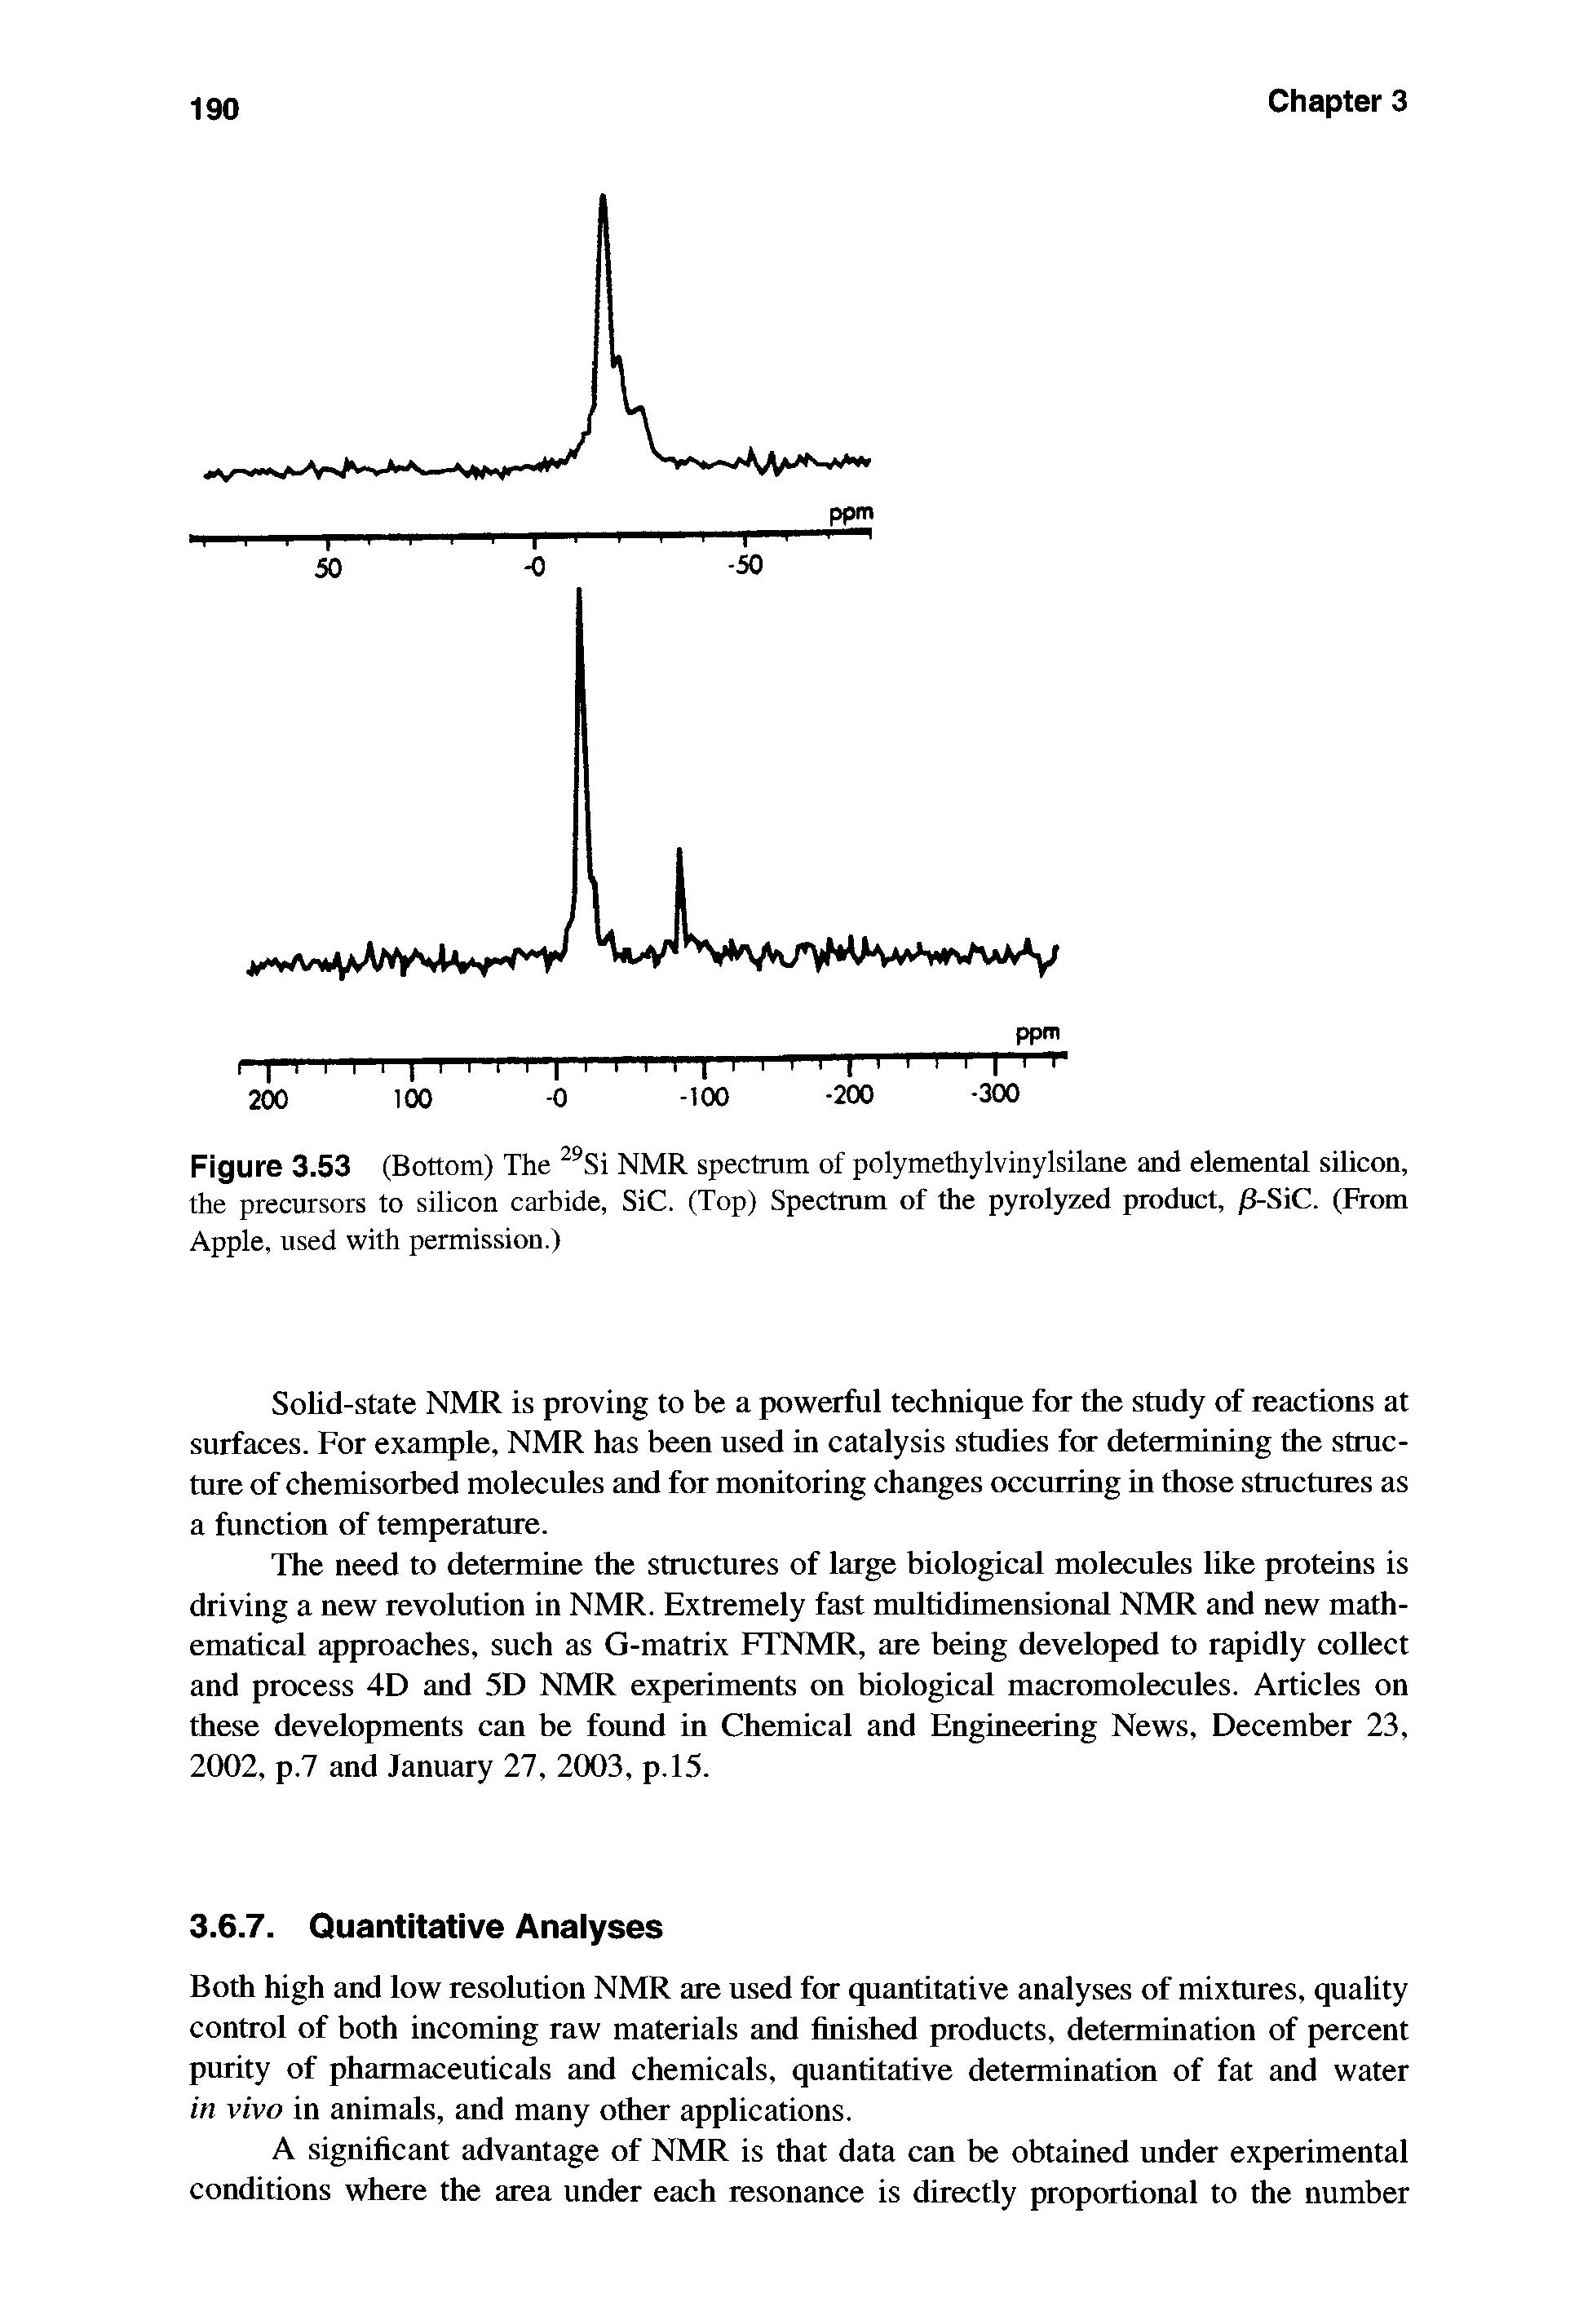 Figure 3.53 (Bottom) The NMR spectrum of polymethylvinylsilane and elemental silicon, the precursors to silicon carbide, SiC. (Top) Spectrum of the pyrolyzed product, fi-SiC. (From Apple, used with permission.)...